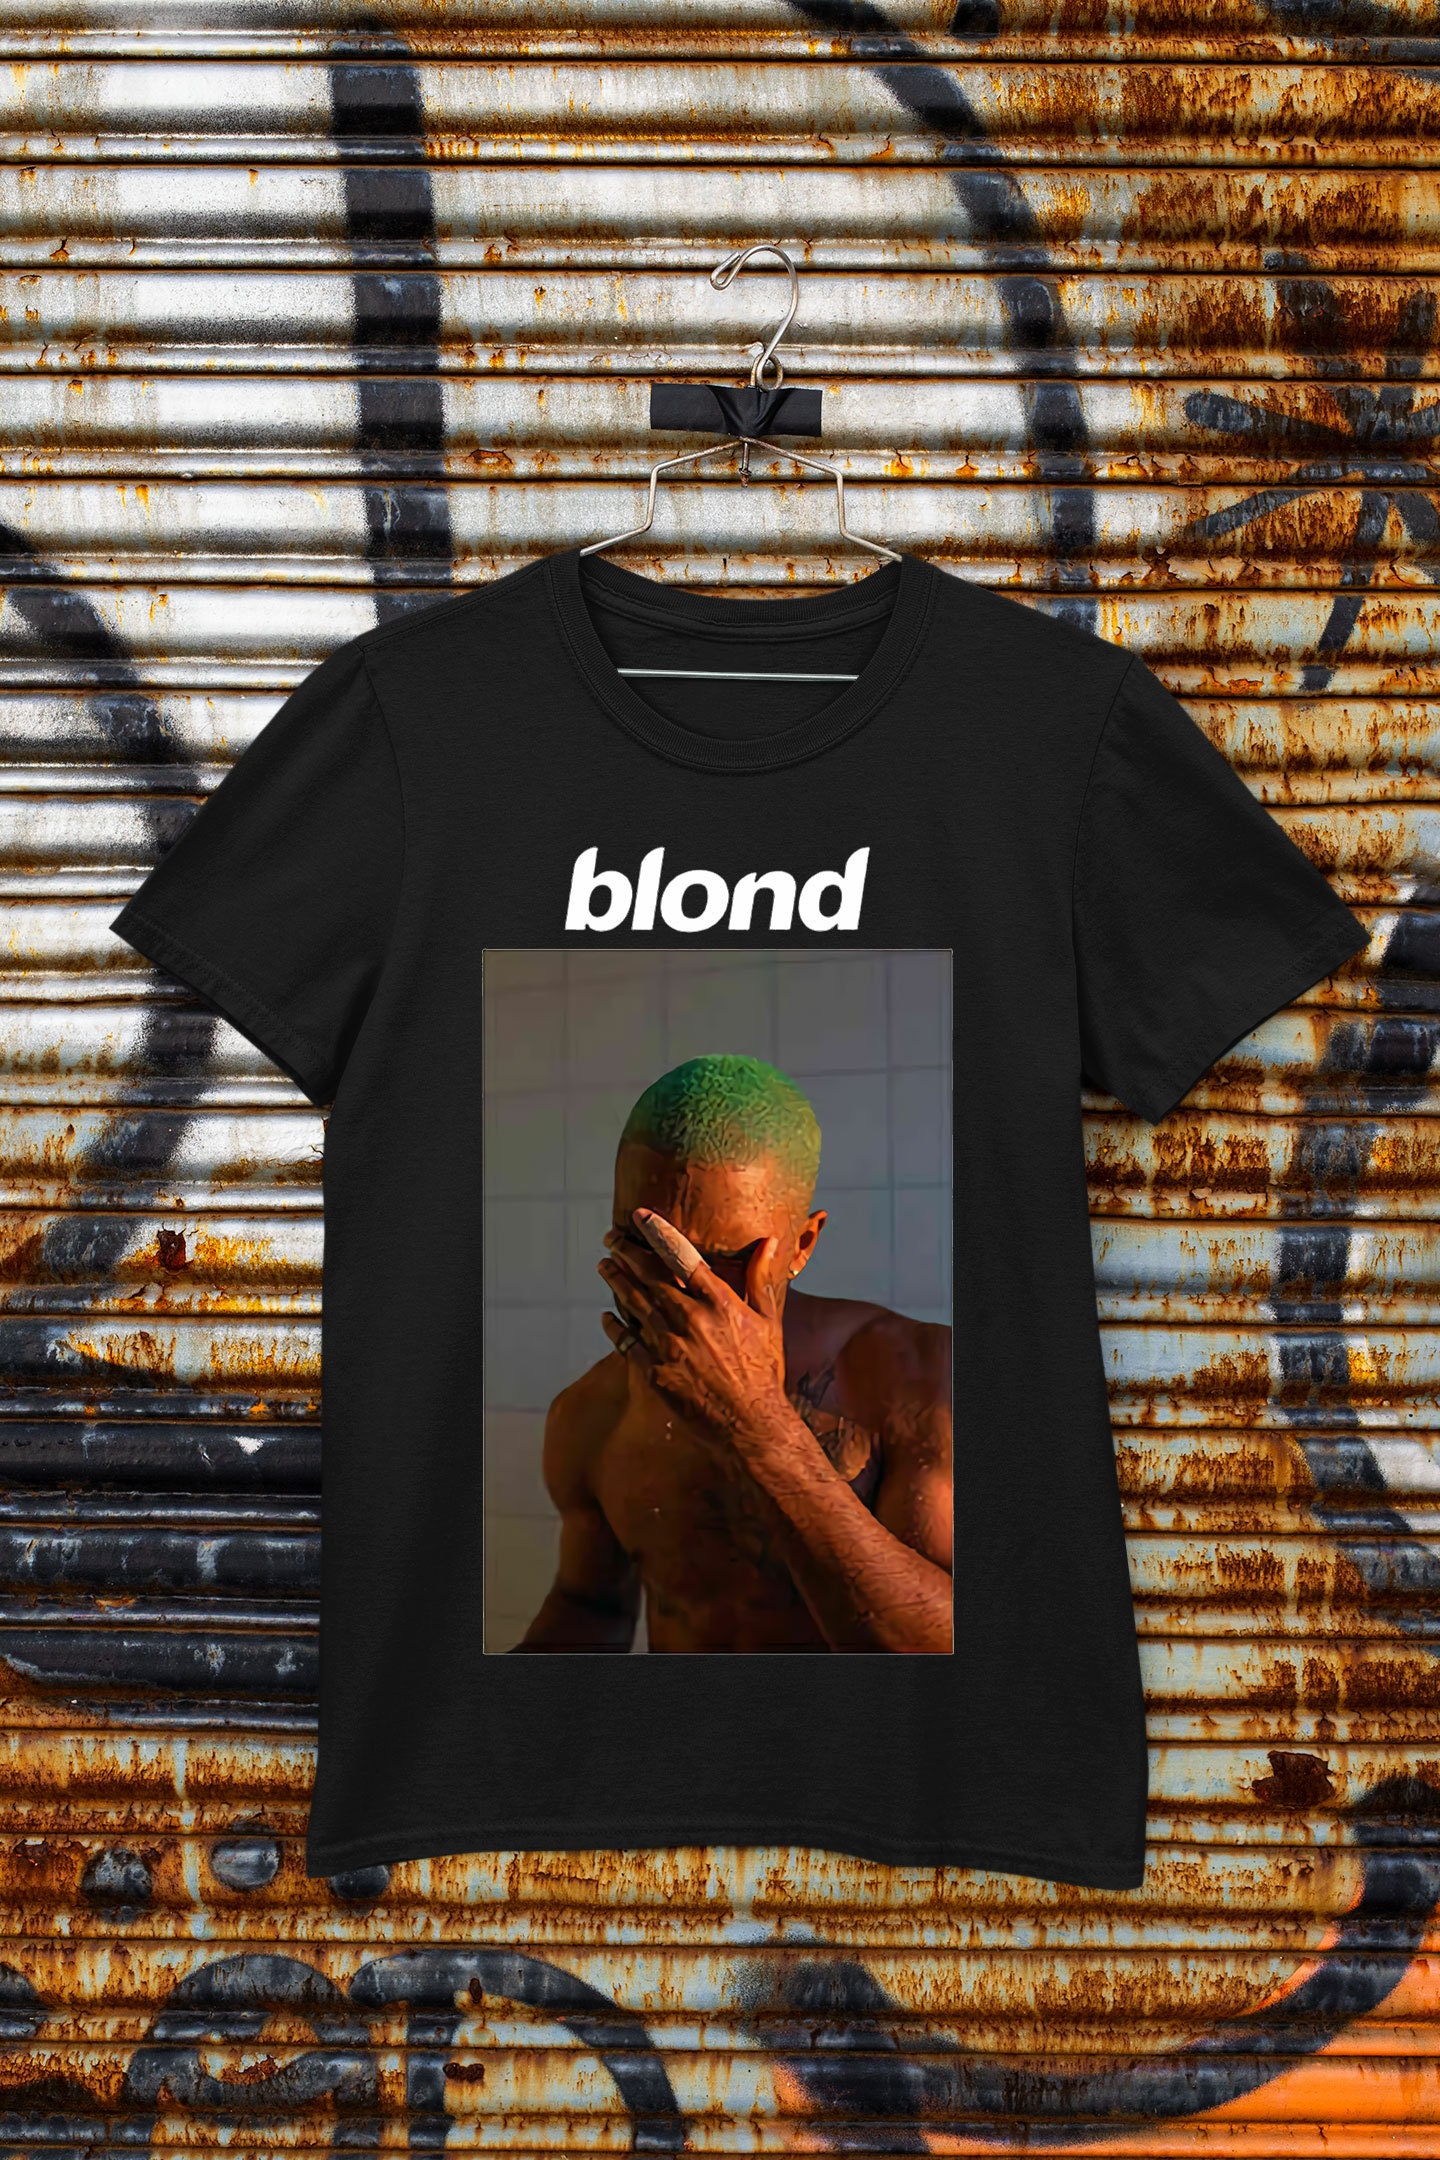 Frank Ocean Chanel T-Shirts for Sale